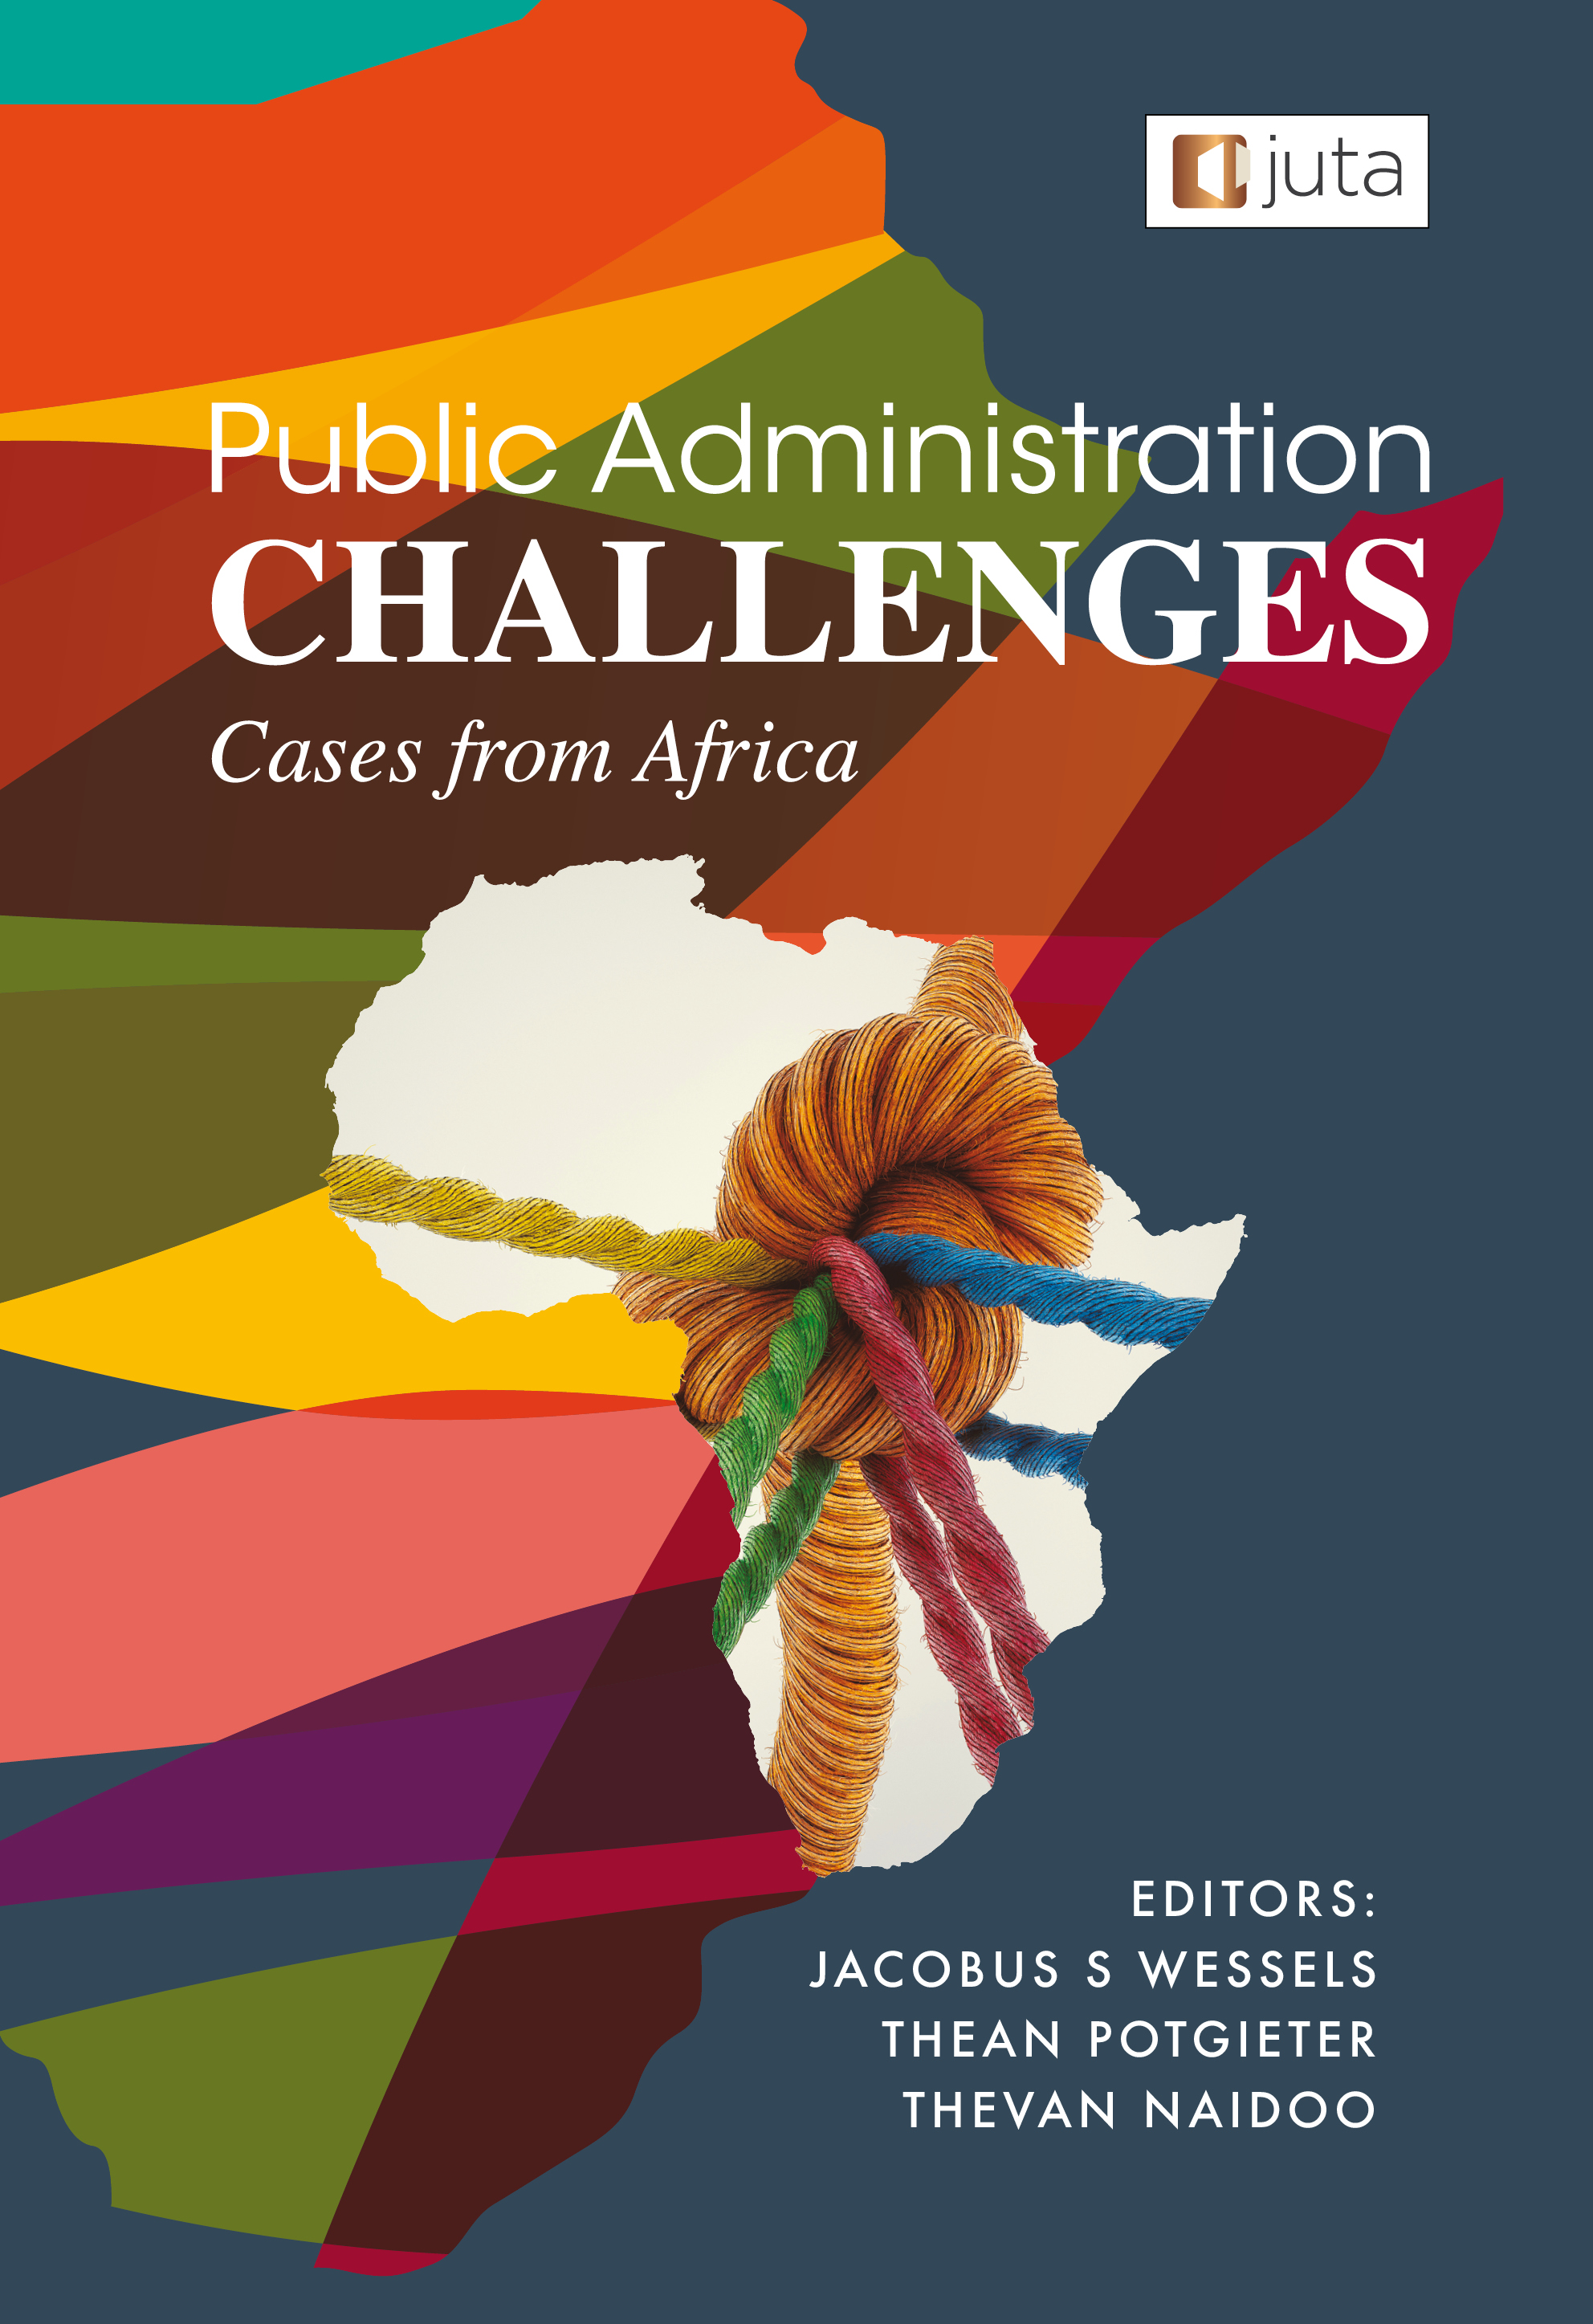 Public Administration Challenges: Cases from Africa